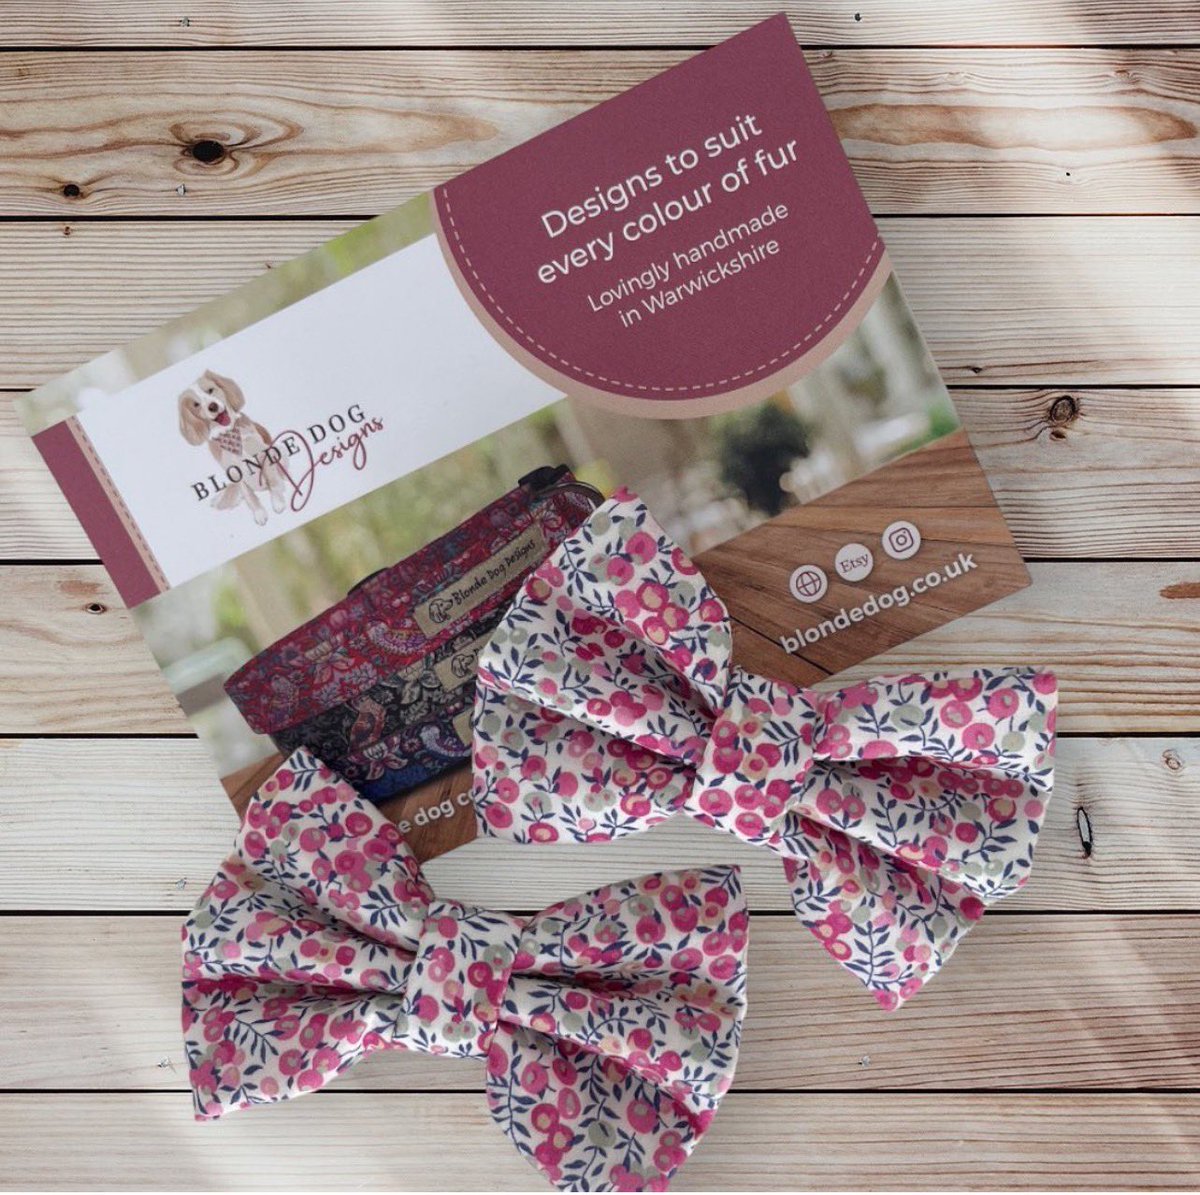 BDD Liberty of London ‘Wiltshire Bud’ dog collar bows🎀 The pawfect accessory for all the pretty pooches🐕 #elevenseshour #SmallBusinessWeek #CraftBizParty #MHHSBD